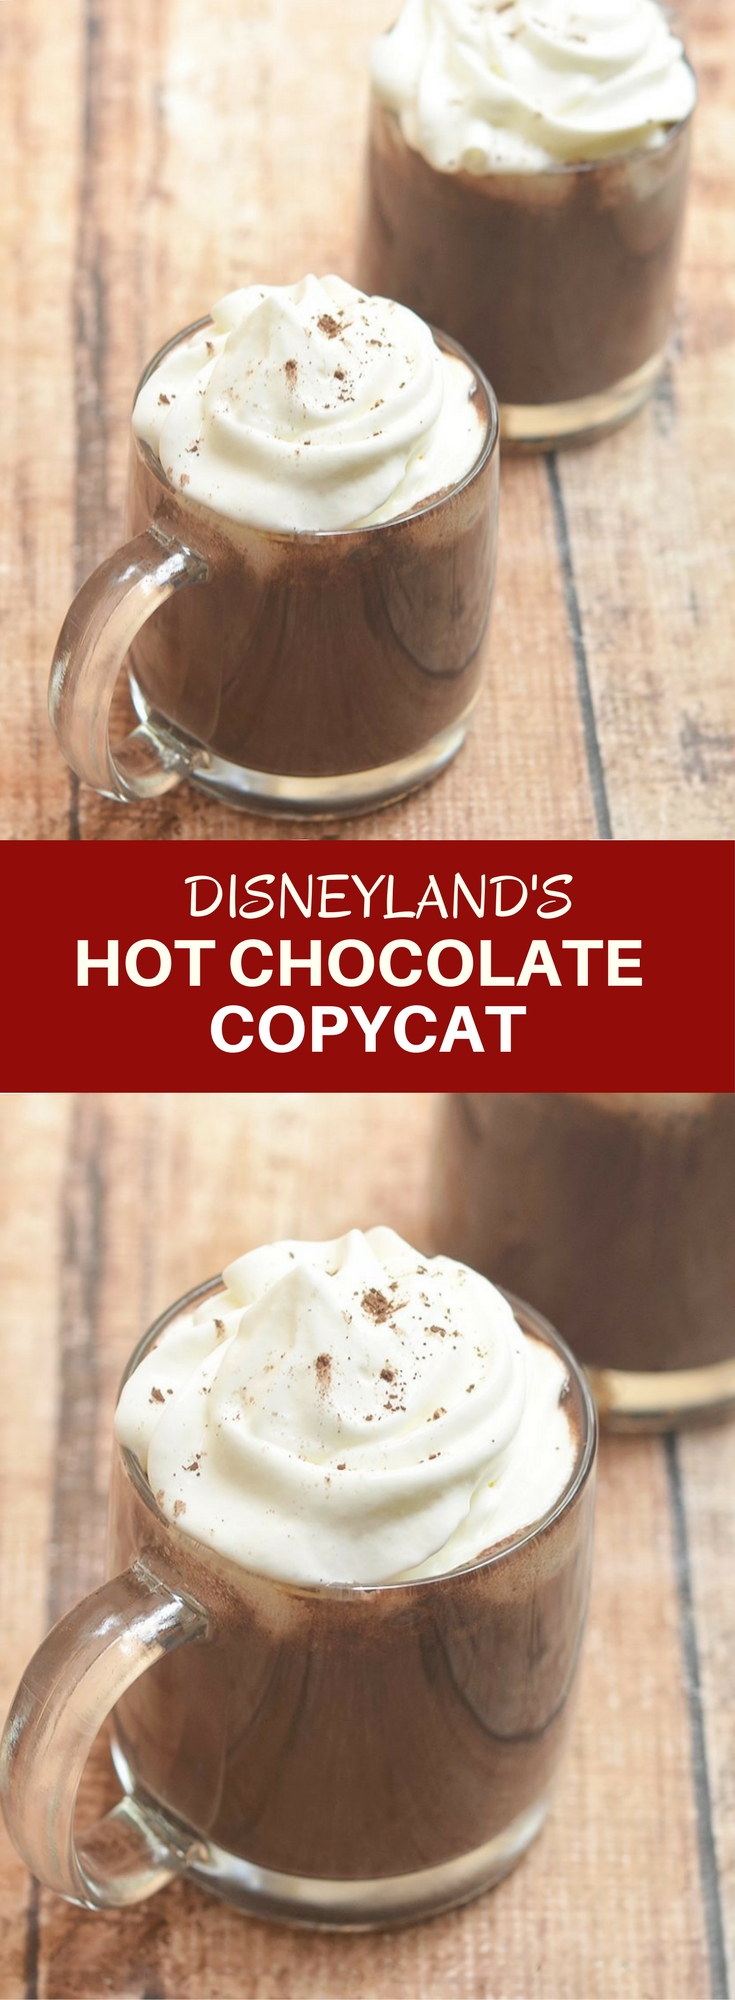 Disneyland's Hot Chocolate Copycat that's creamy and chocolatey at every sip! Rich and indulgent, it's the perfect treat for cold winter days!